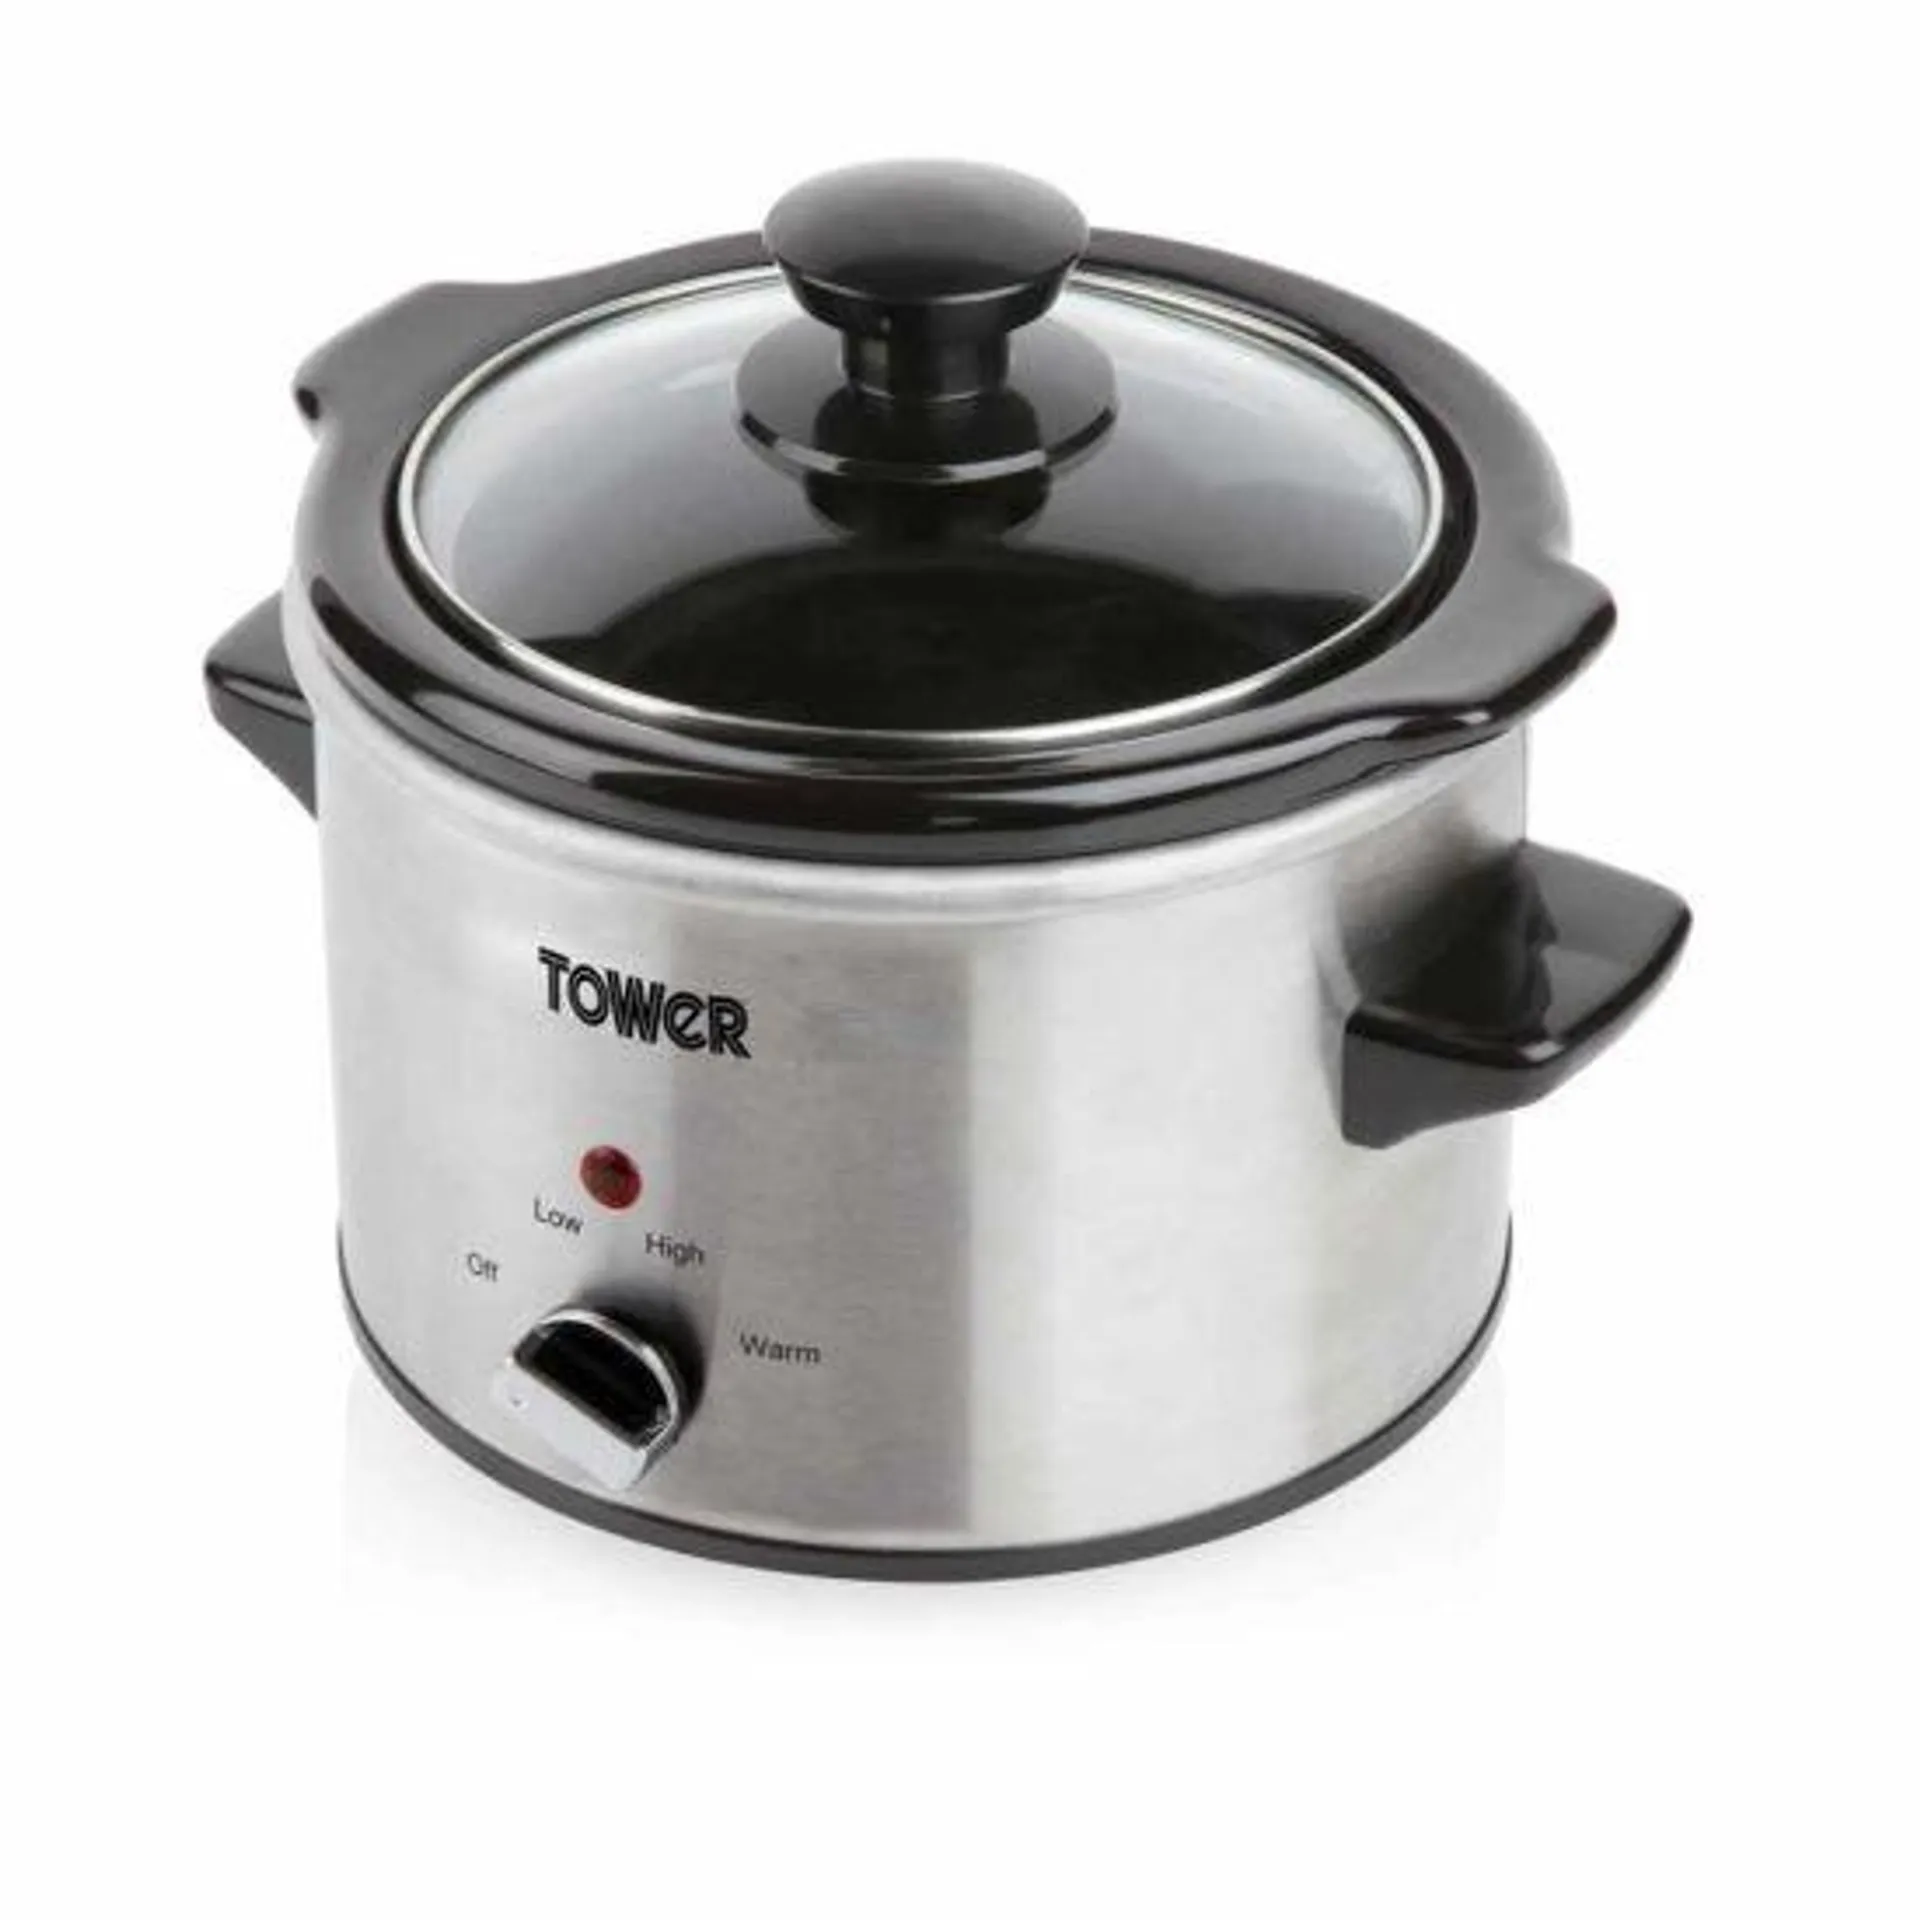 Tower T16020 120W 1.5L Slow Cooker with 3 Heat Settings - Stainless Steel